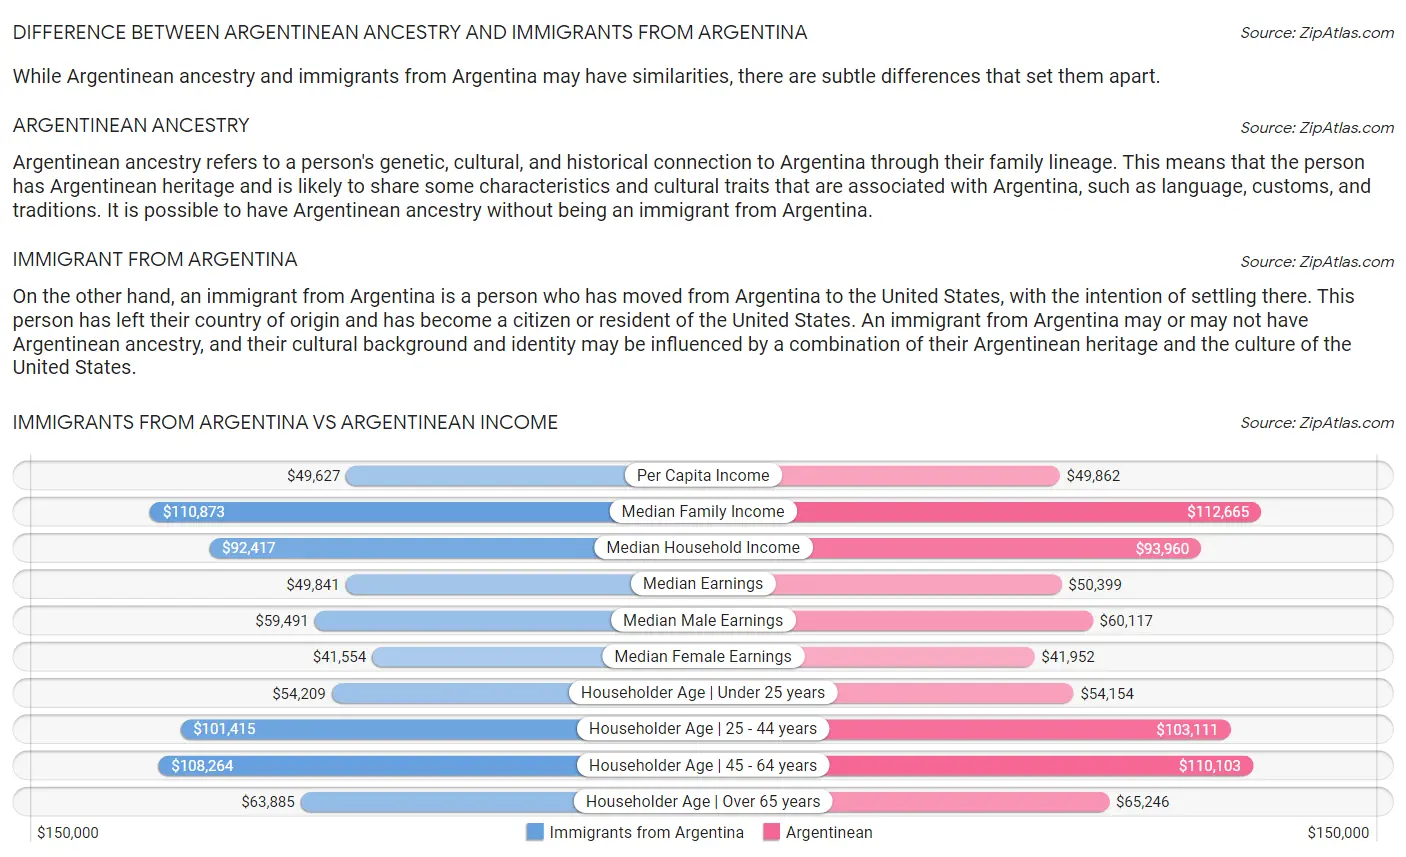 Immigrants from Argentina vs Argentinean Income